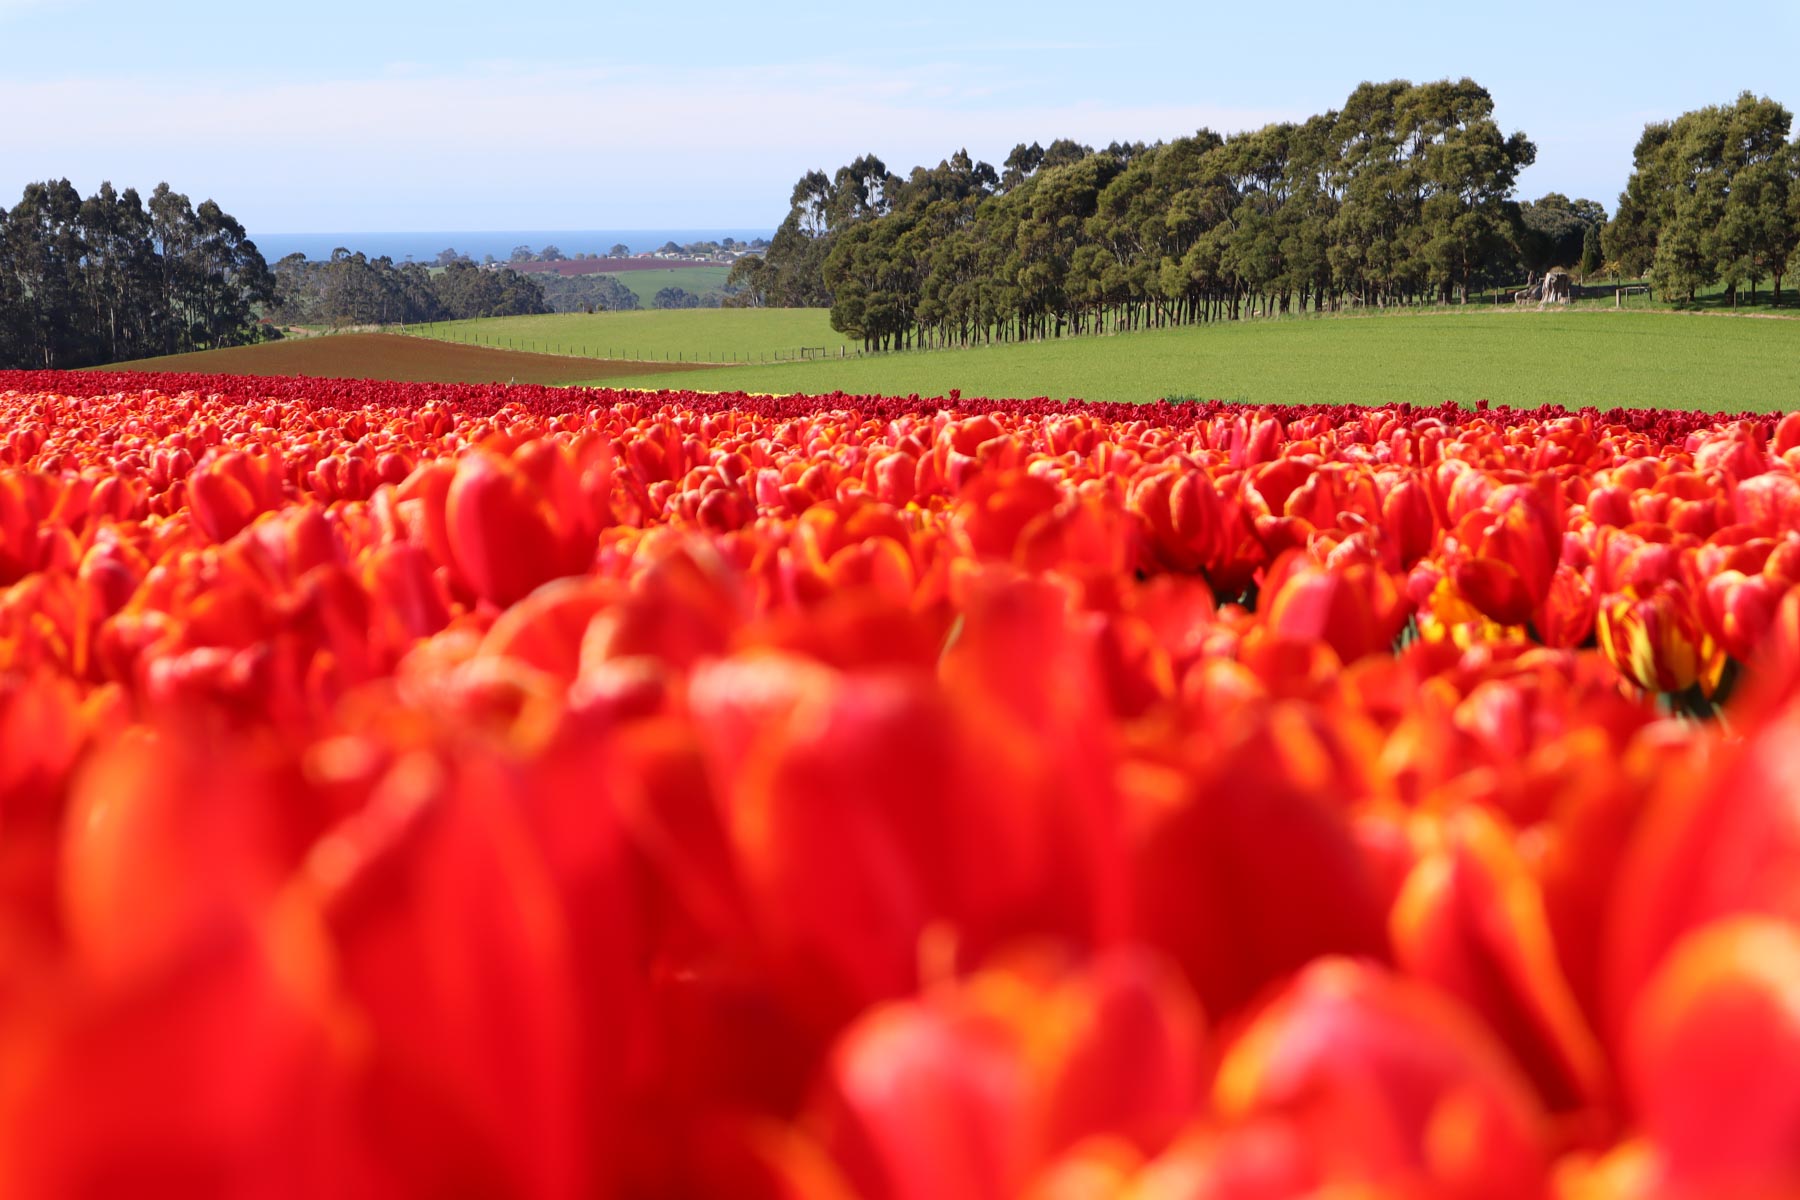 Capture yourself amidst blooming tulips on our exclusive farm tour. Limited spots available – book now!